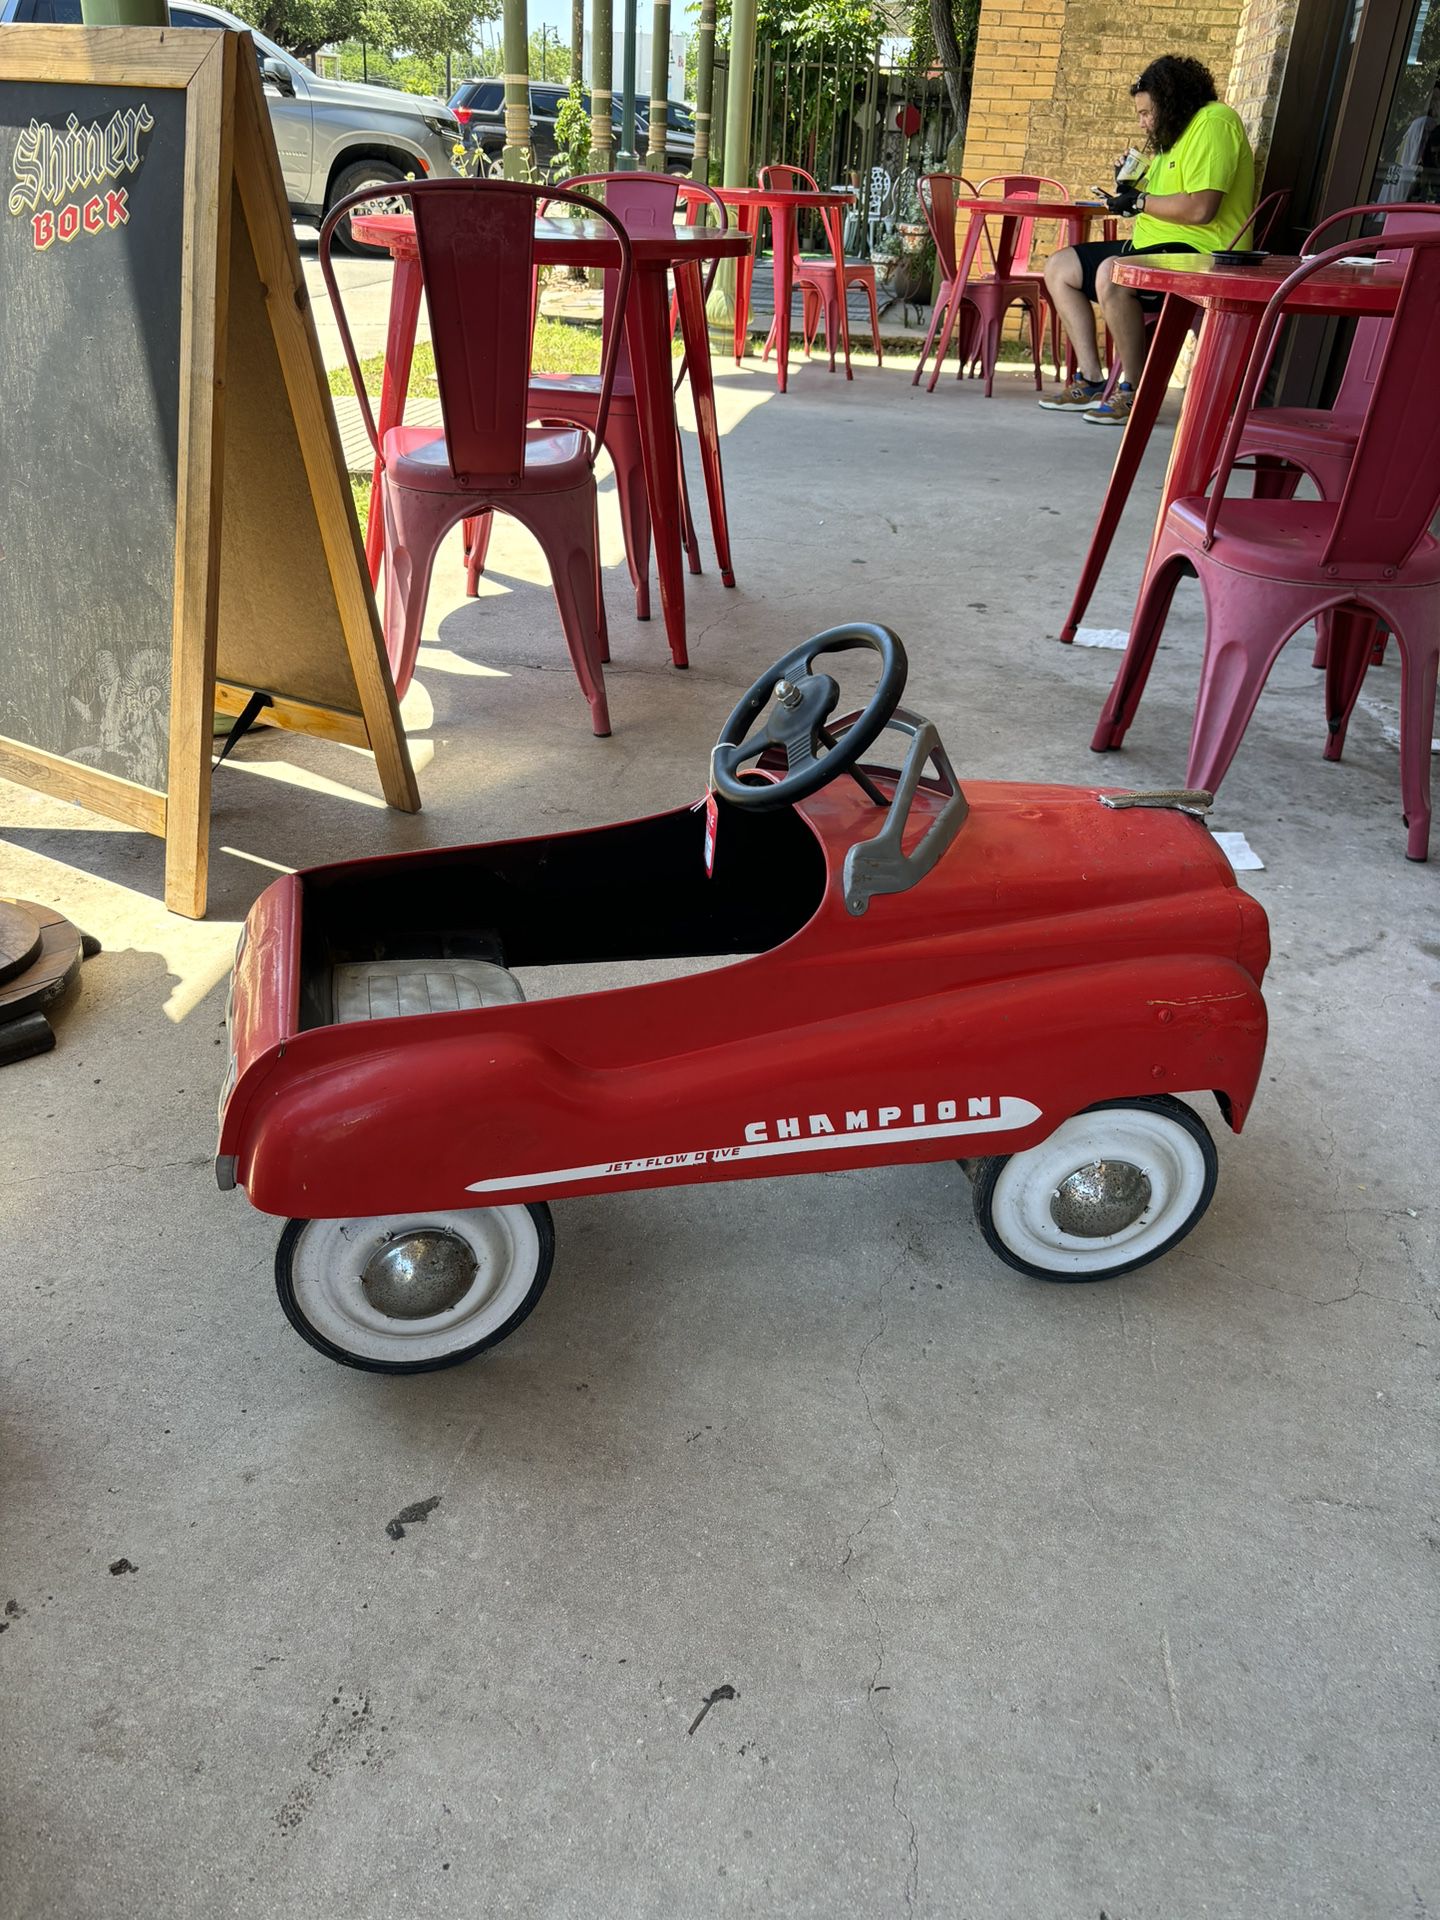 35x15x24 metal antique CHAMPION JET FLOW DRIVE 1950s pedal red car. 189.00  Johanna at Antiques and More. Located at 316b Main Street Buda. Antiques v